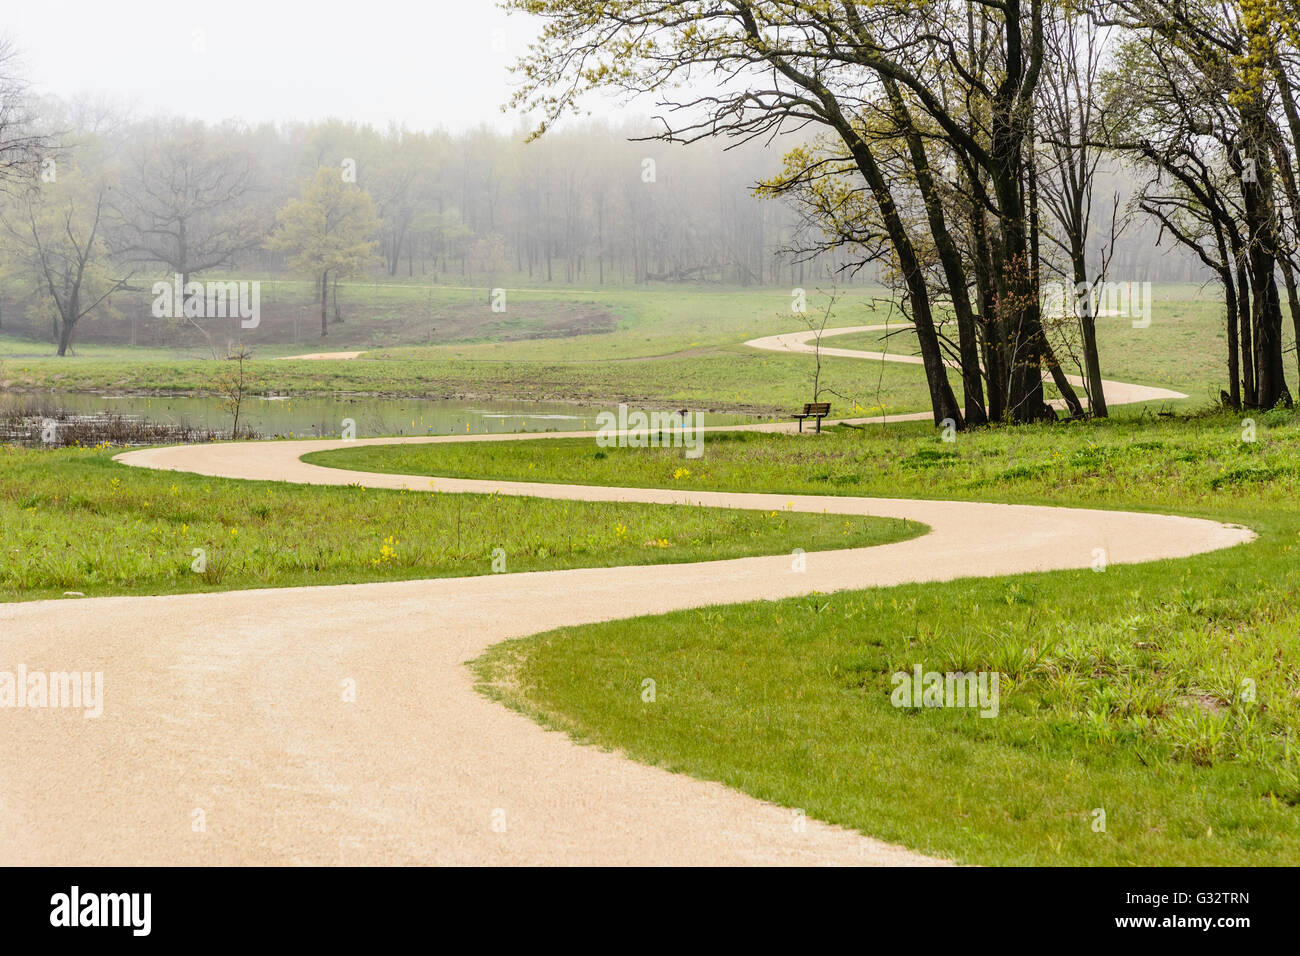 Winding path through rural landscape, Antioch, Illinois, United States Stock Photo